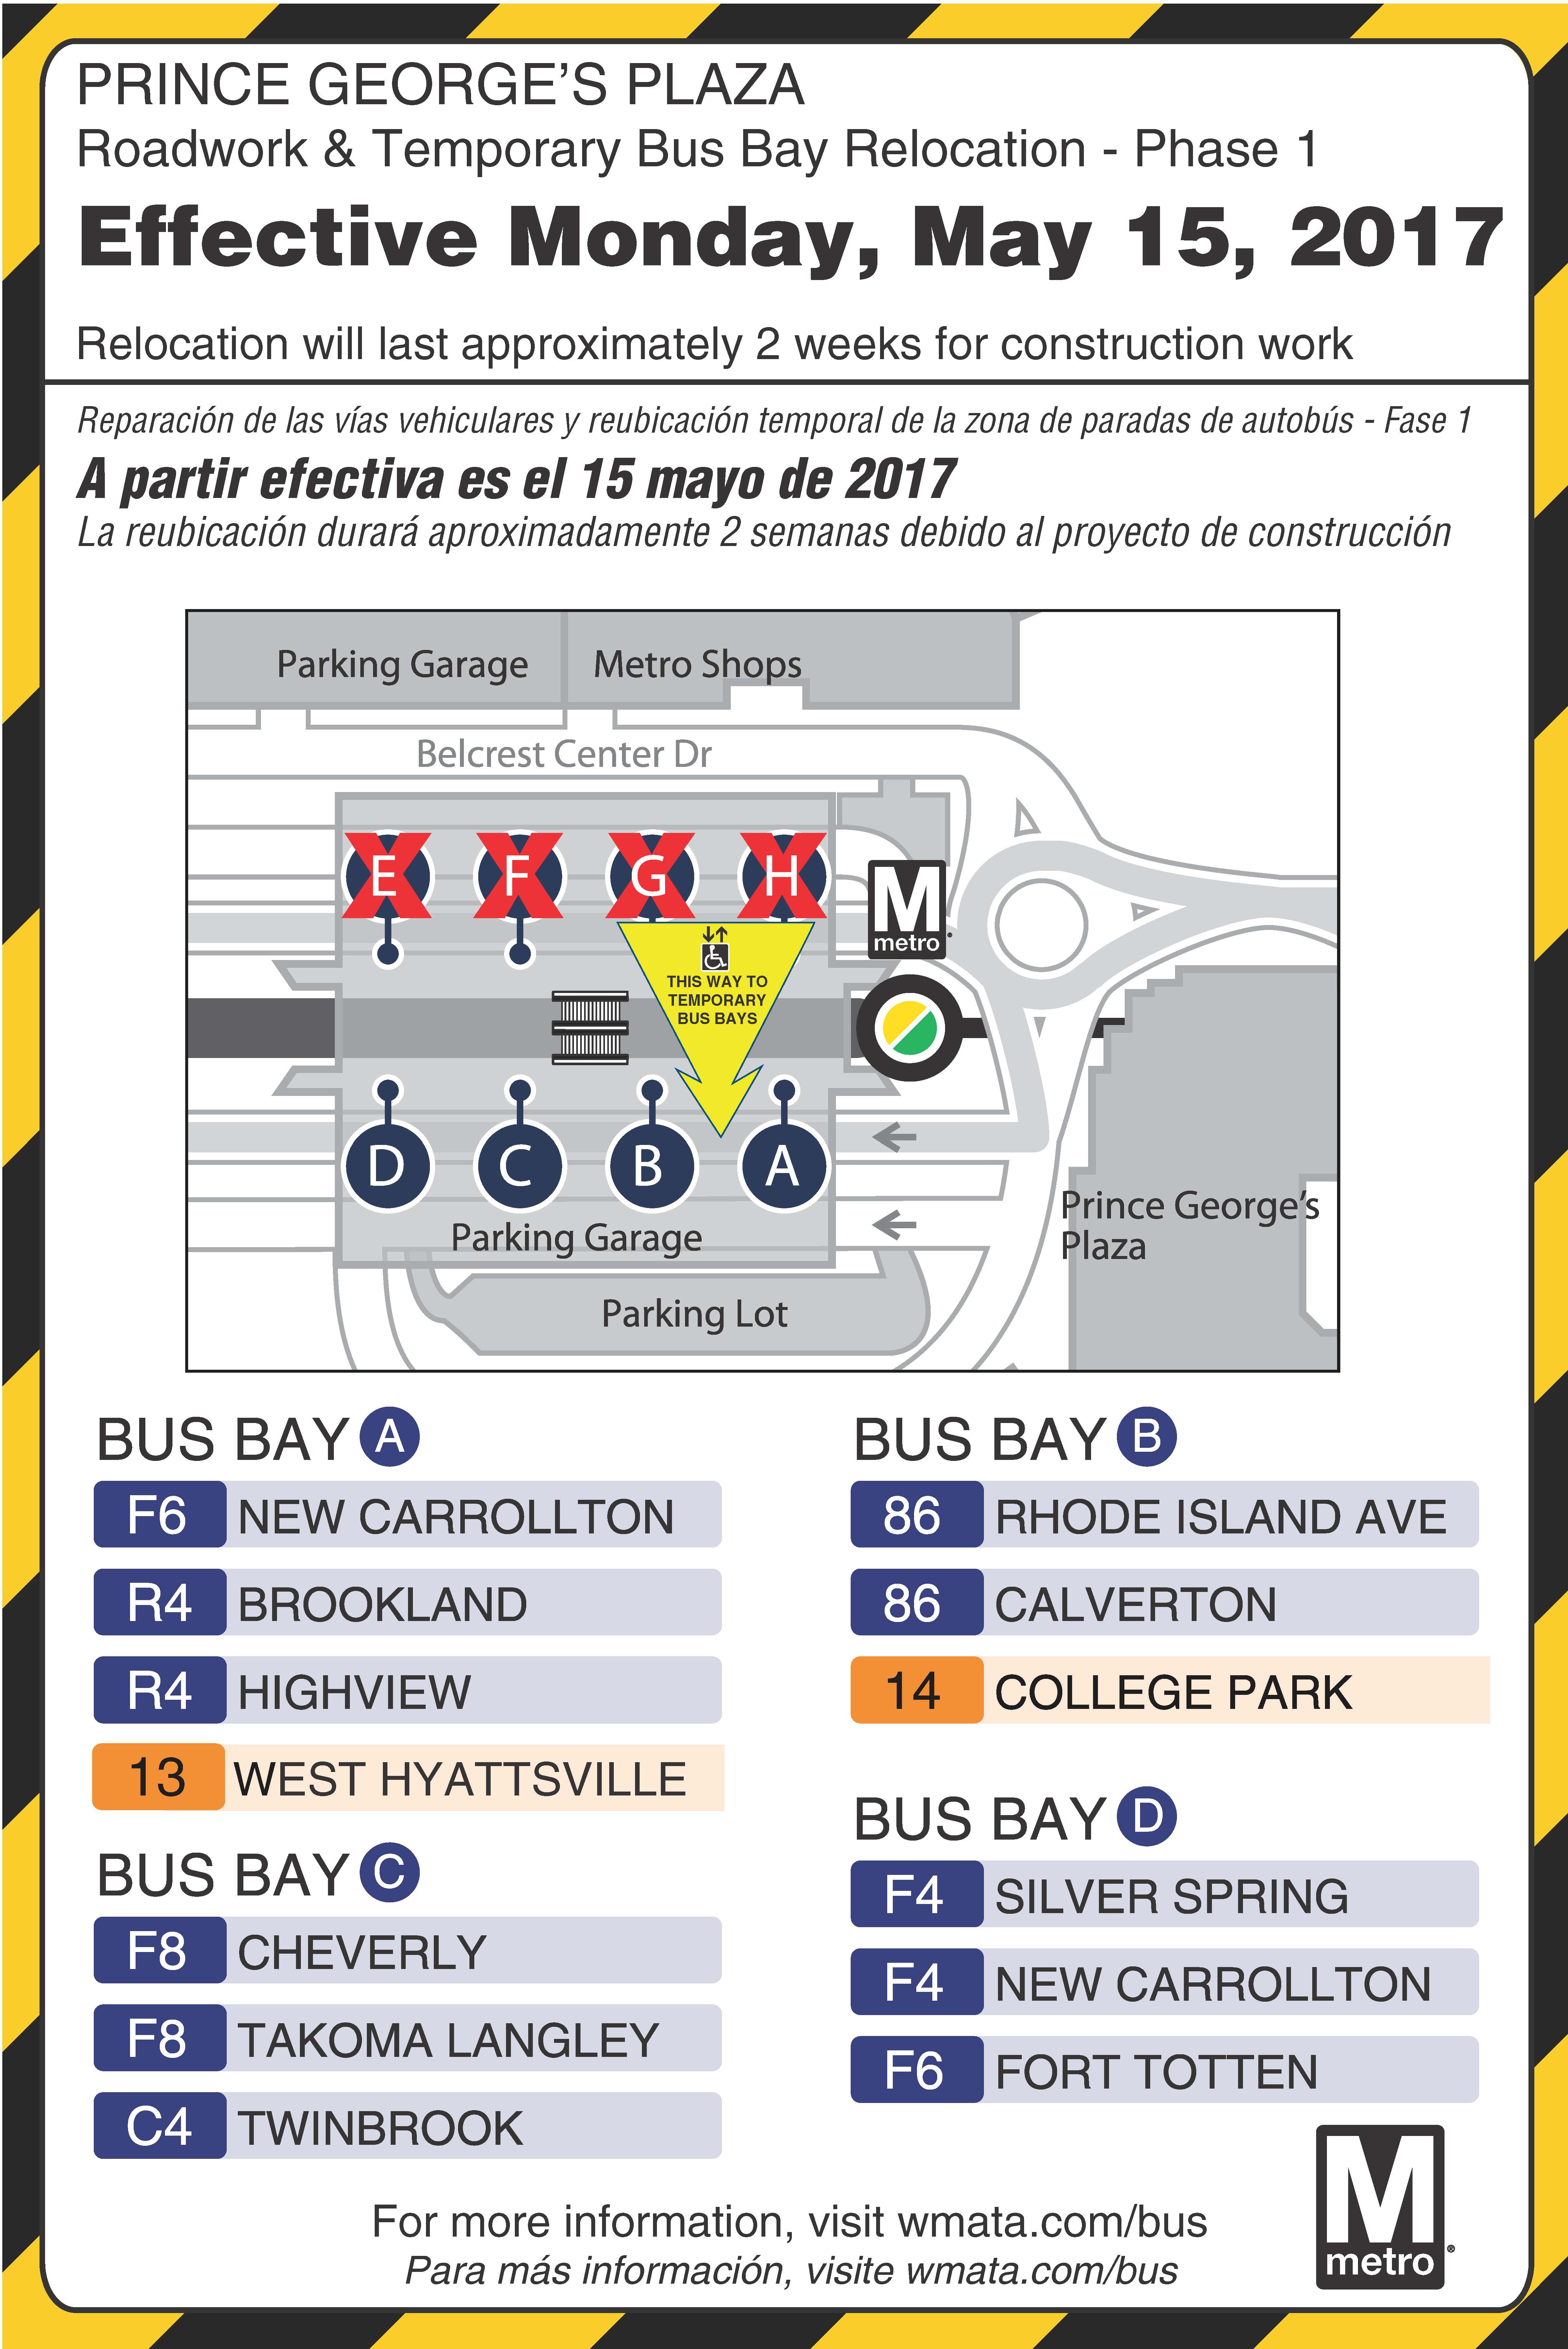 PG Plaza Bus Bay Relocation Phase 1